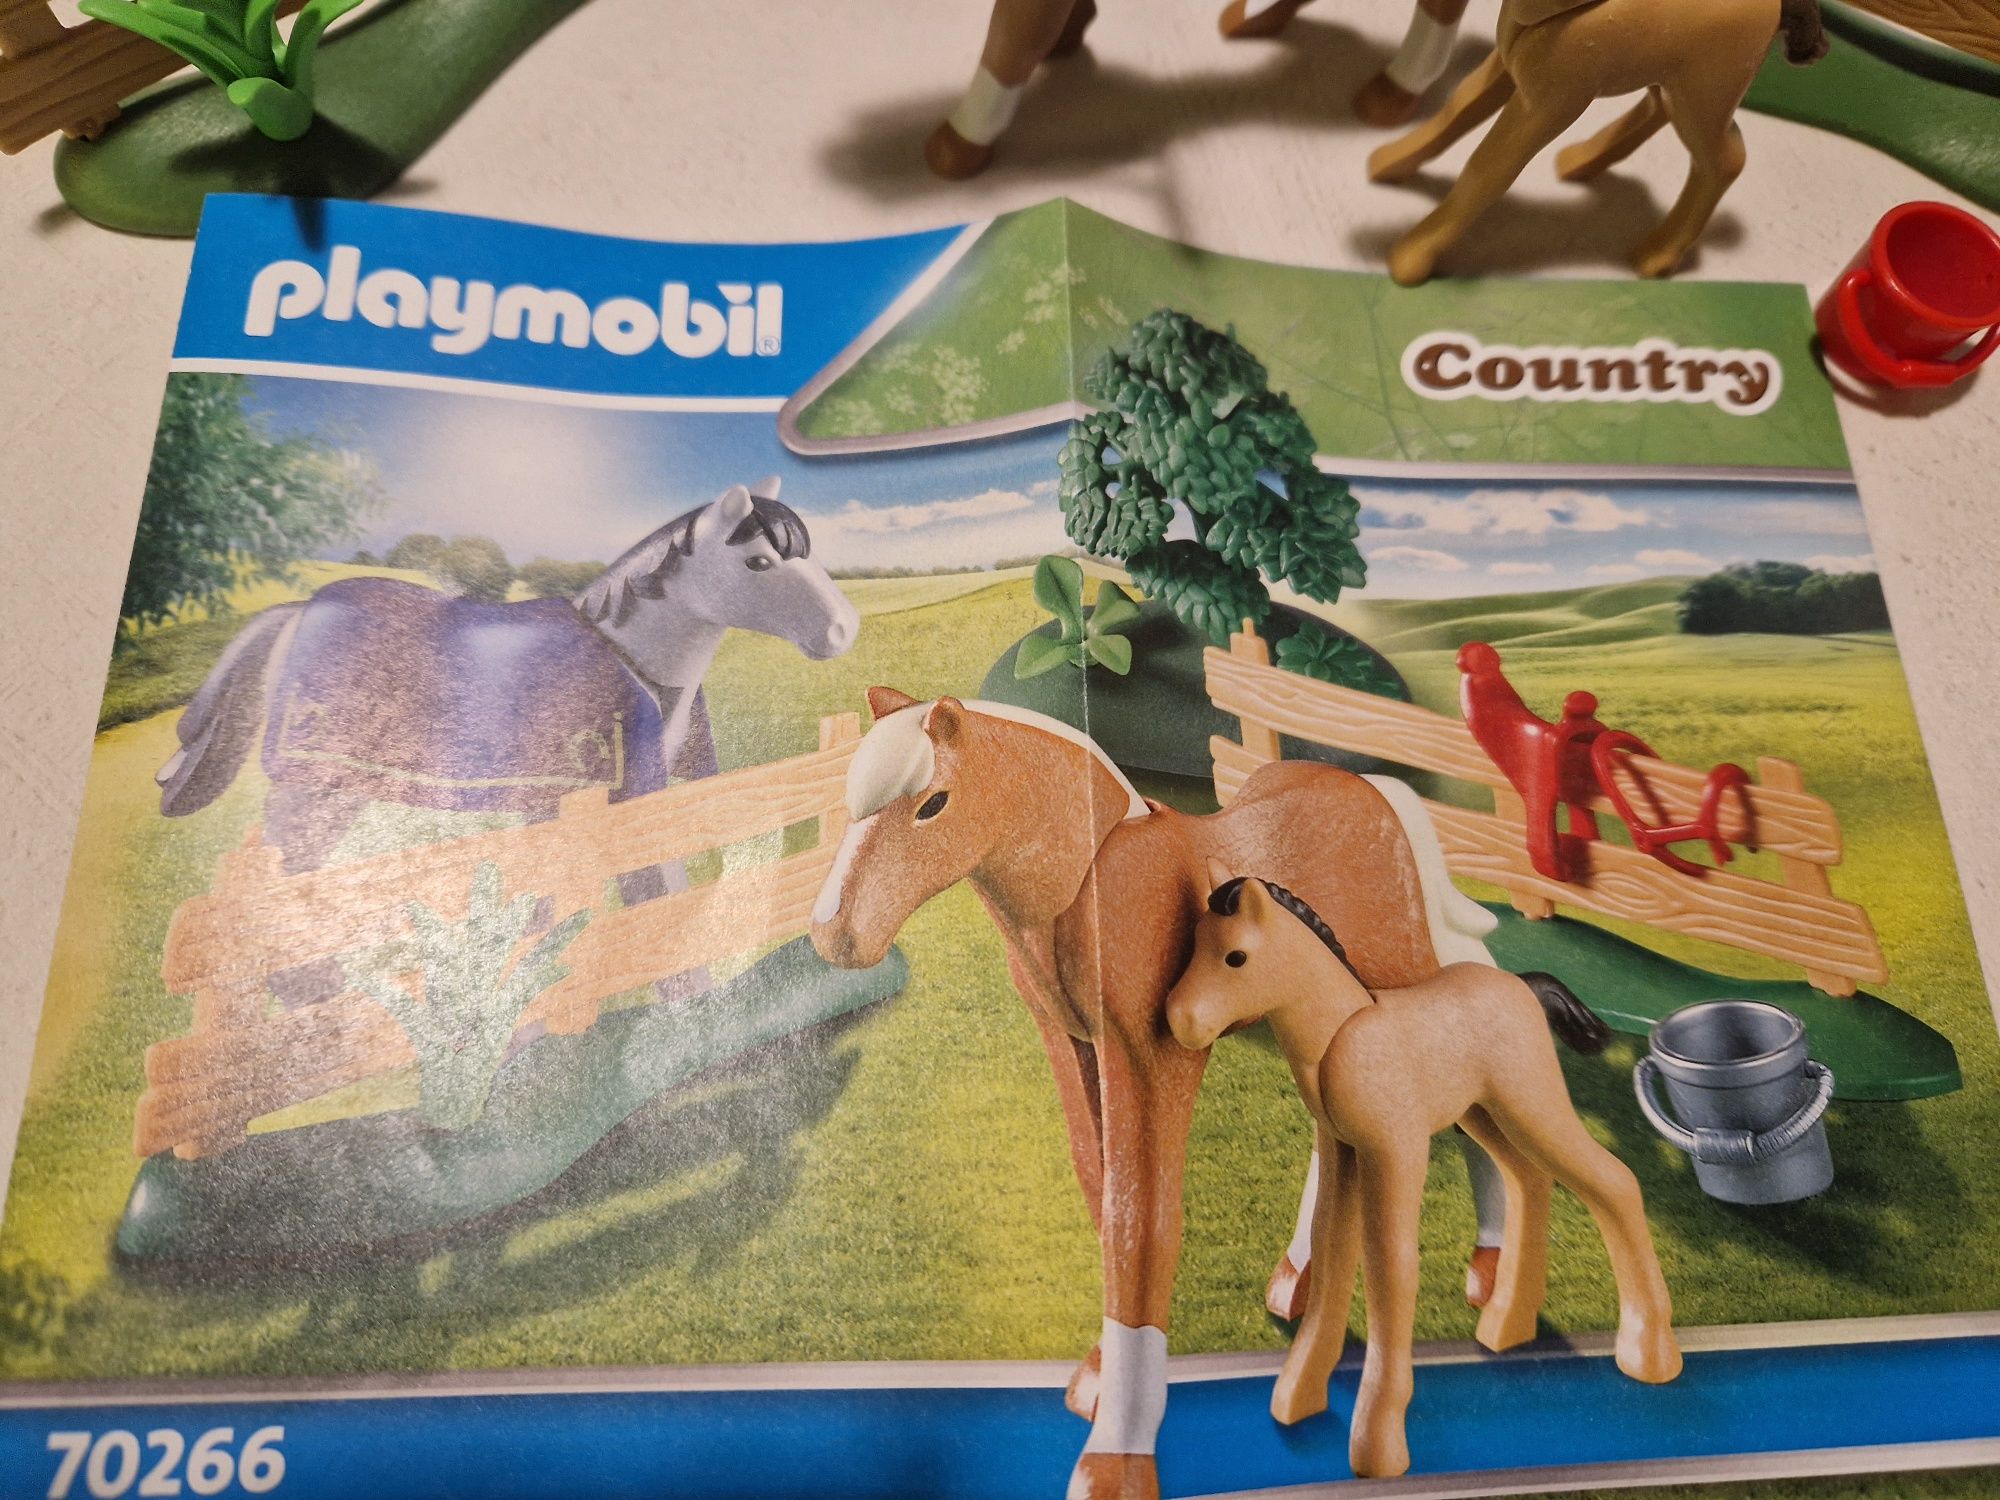 Playmobil country 70266